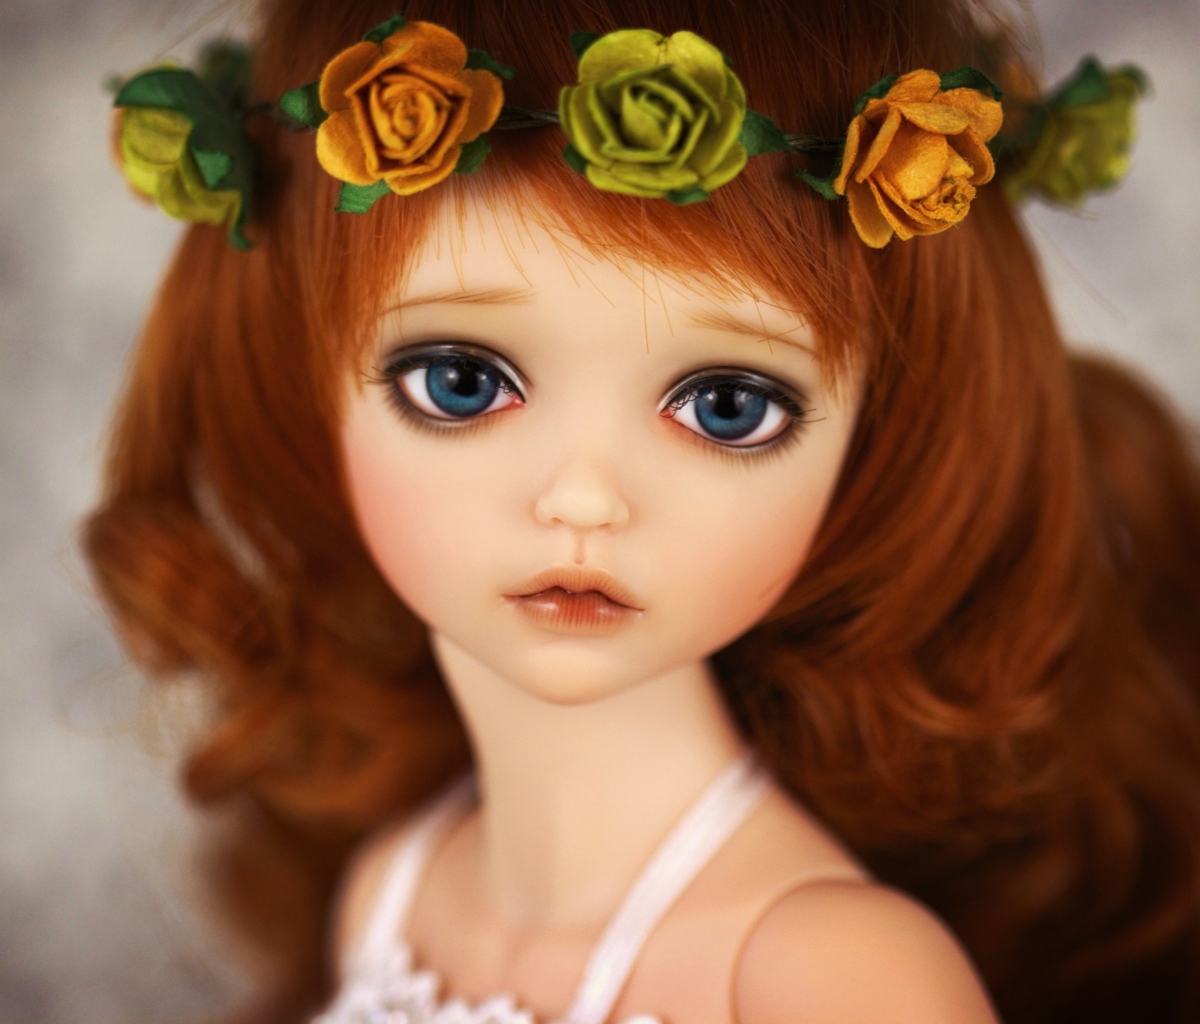 Redhead Doll With Flower Crown wallpaper 1200x1024